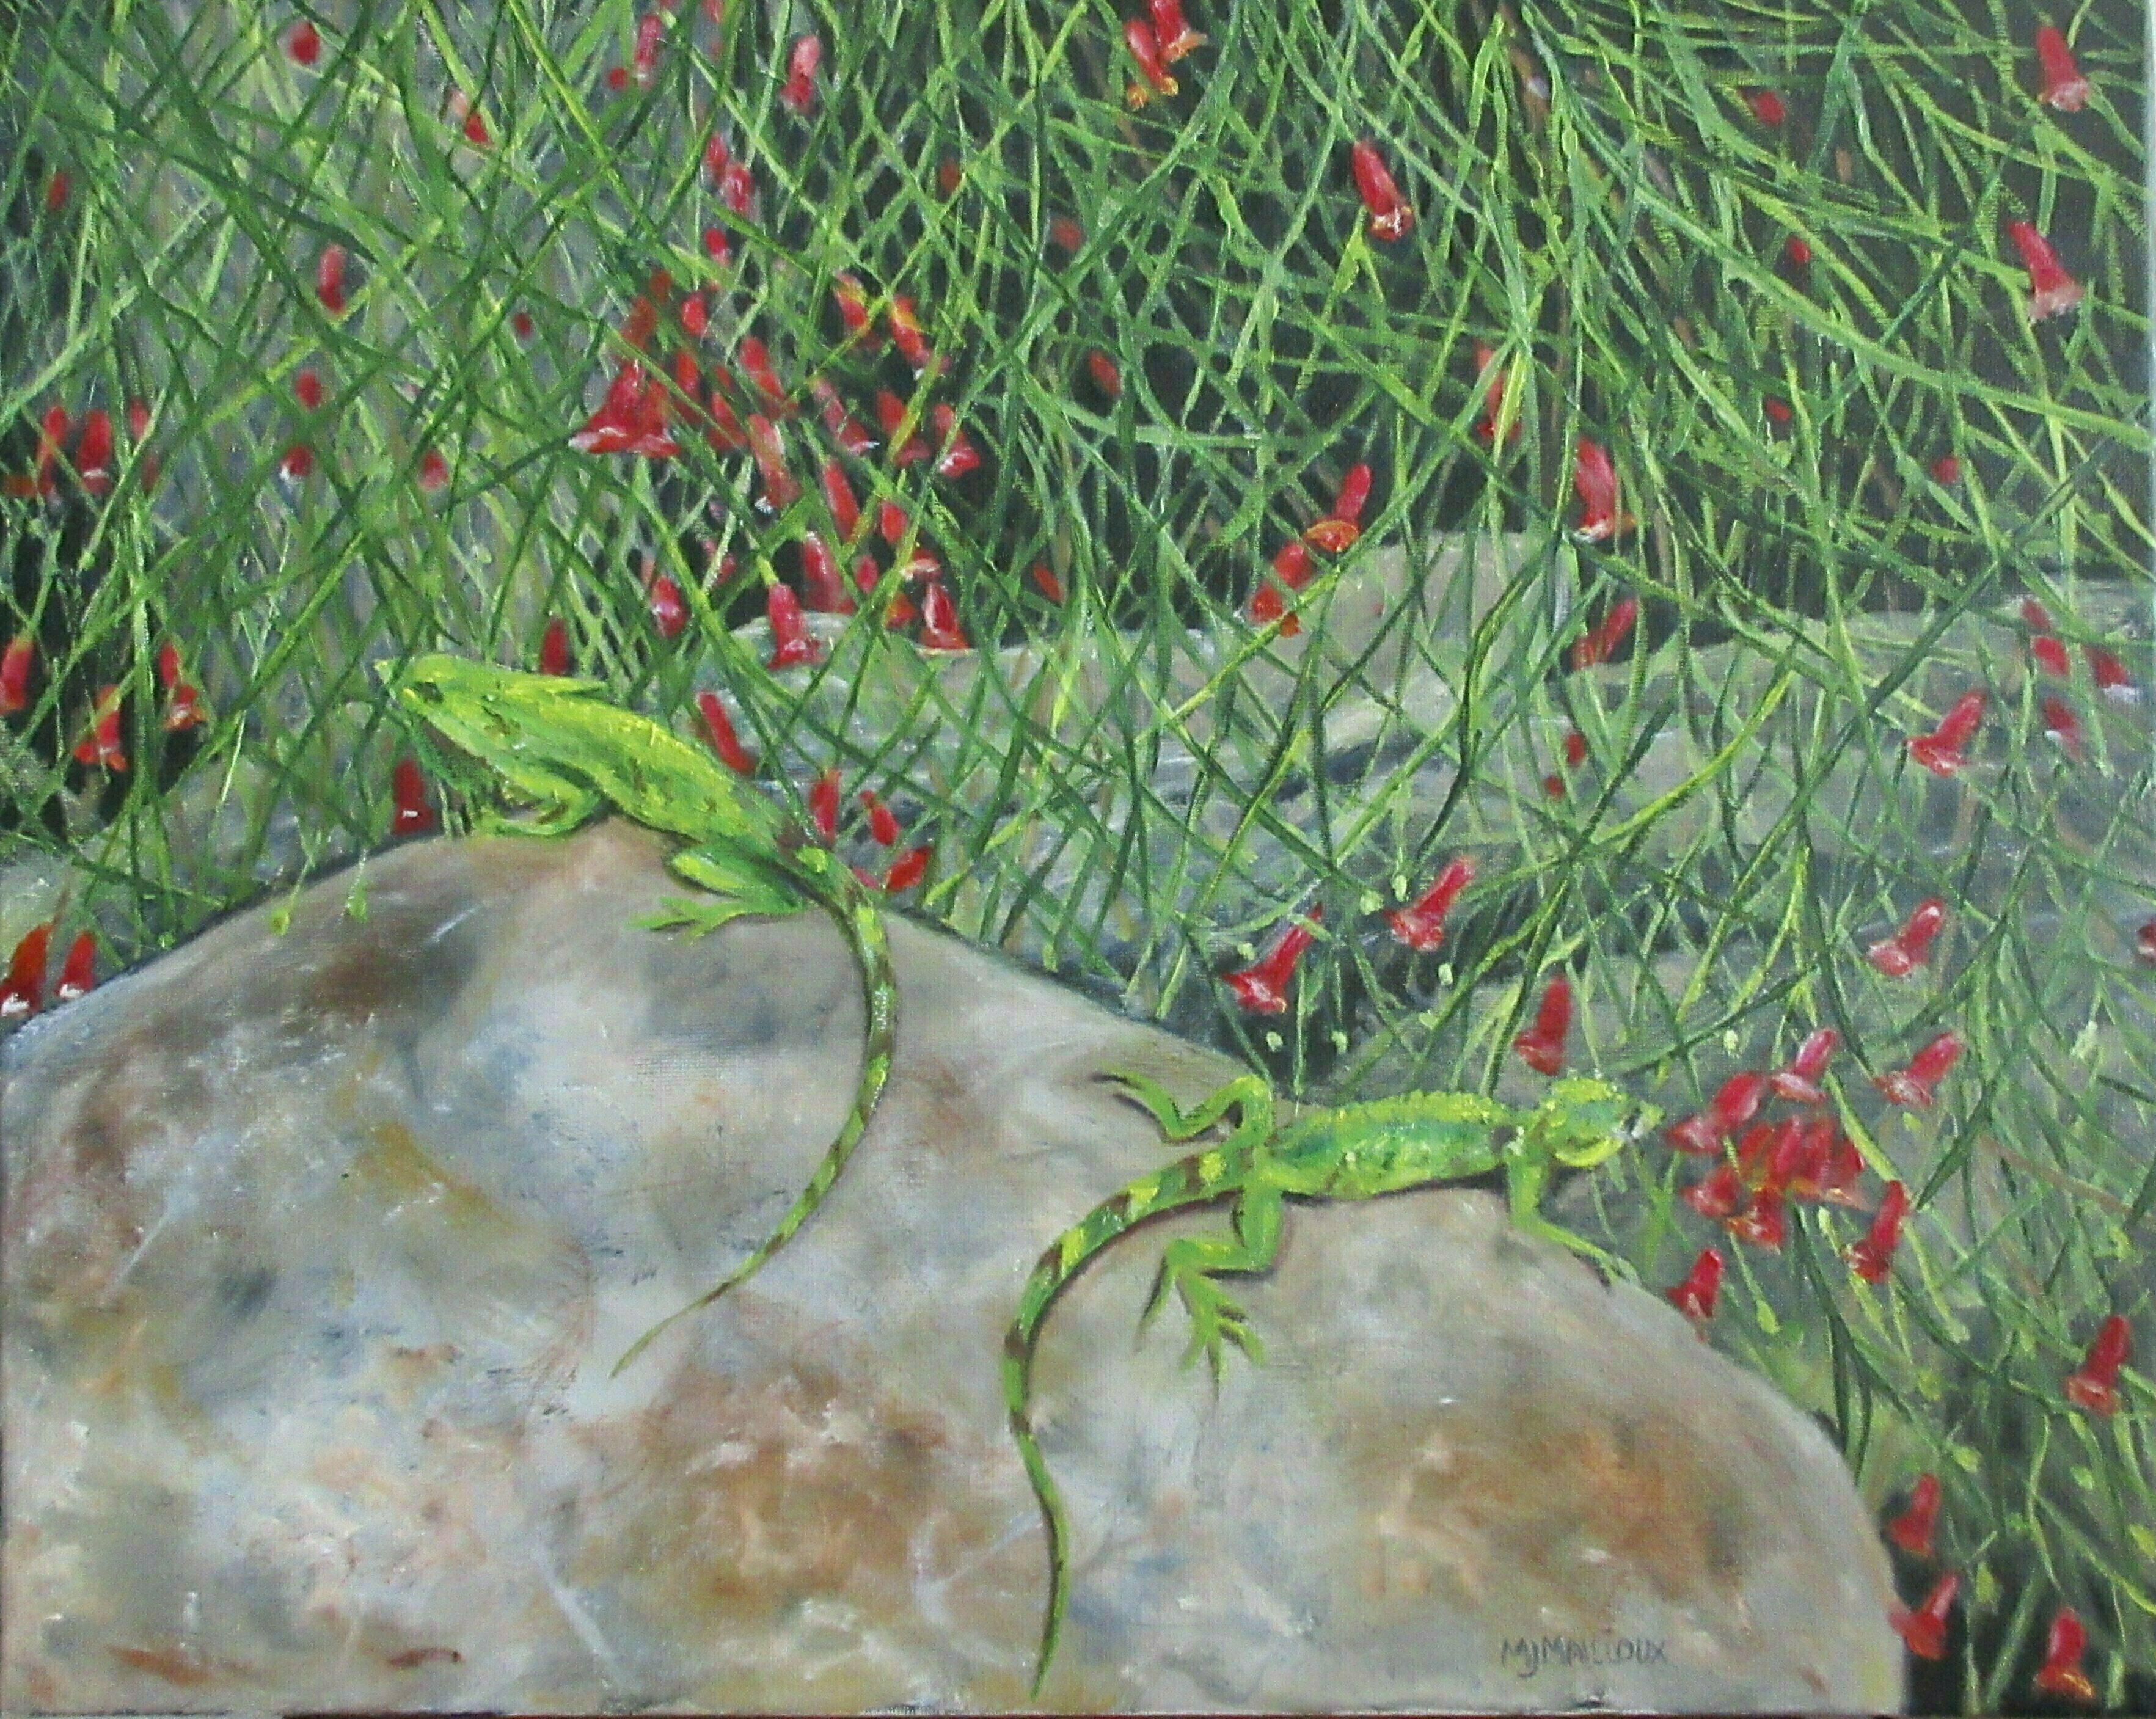 Mary Jean Mailloux; Costa Rica Flora And Fauna, 2022, Original Painting Oil, 20 x 16 inches. Artwork description: 241 Two tiny iguanas finding warmth in the morning sunshine, almost hidden by the camouflage of the cascading flowers over the rocks, brought so much brightness to the day.  I hope I have shared the joy I felt. ...